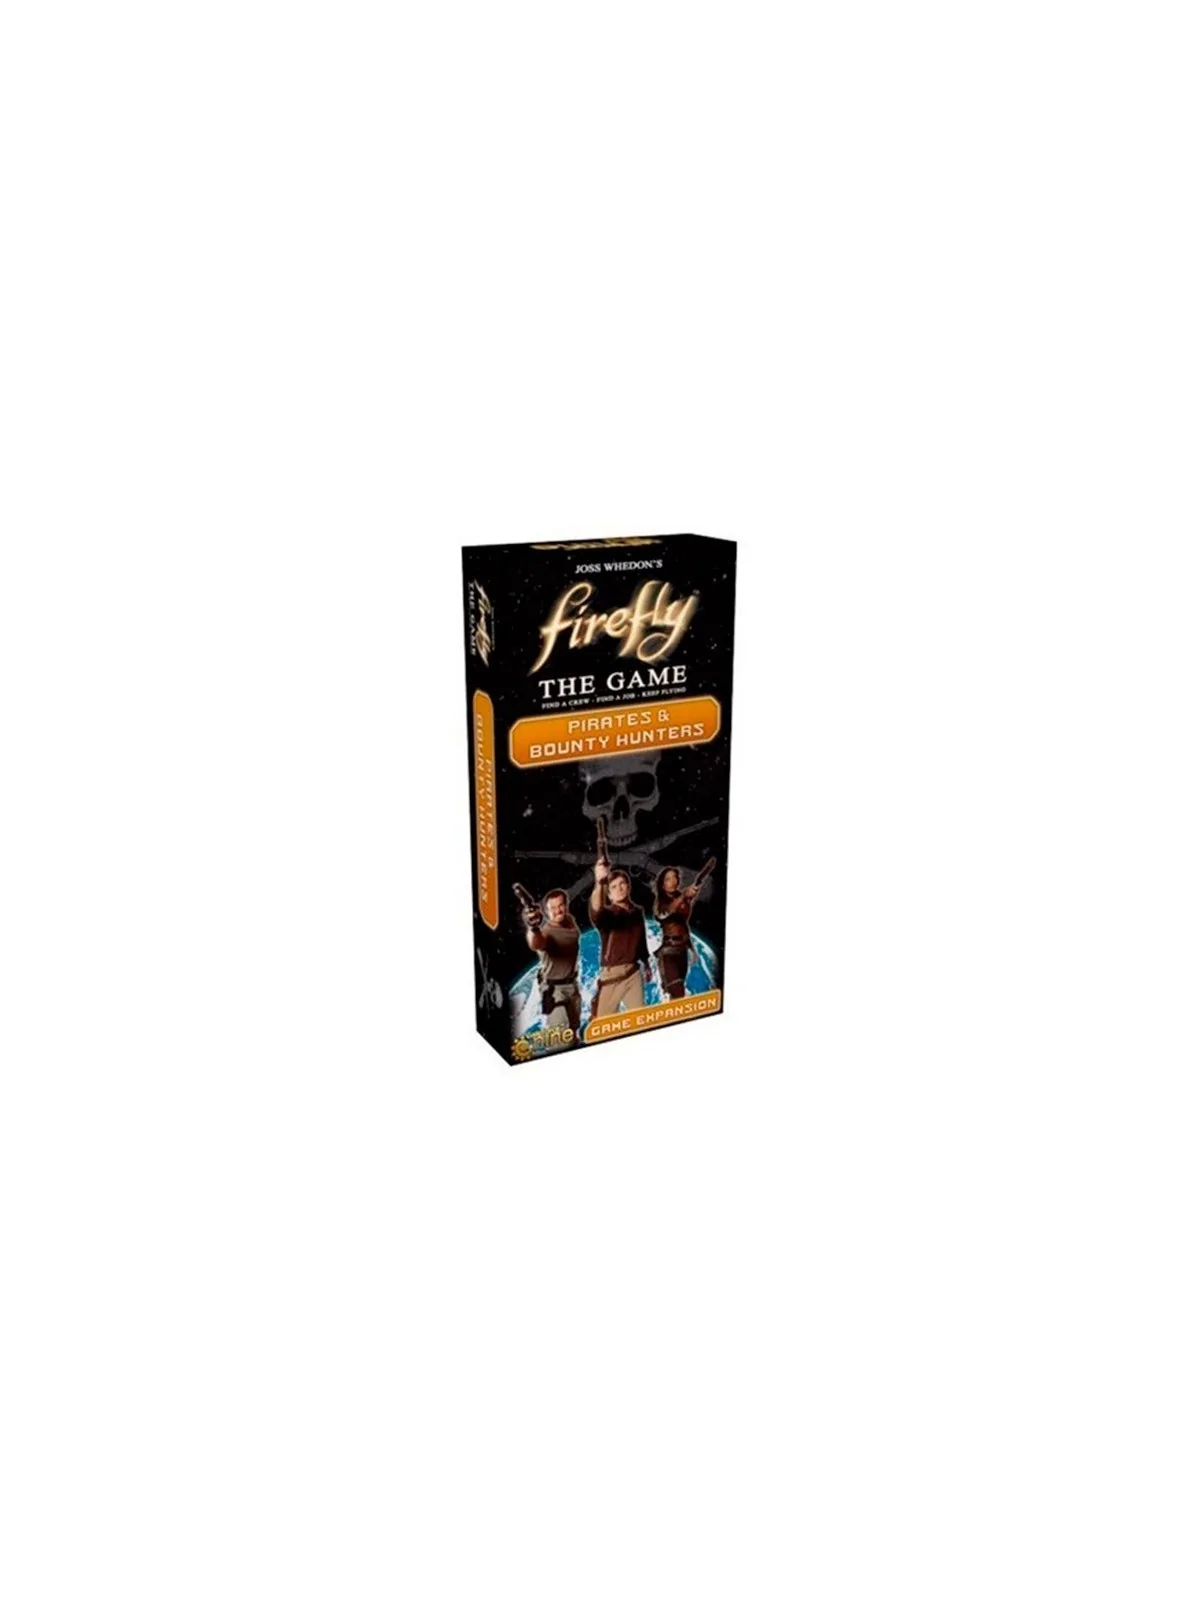 Comprar Firefly: The Game - Pirates & Bounty Hunters (Inglés) barato a